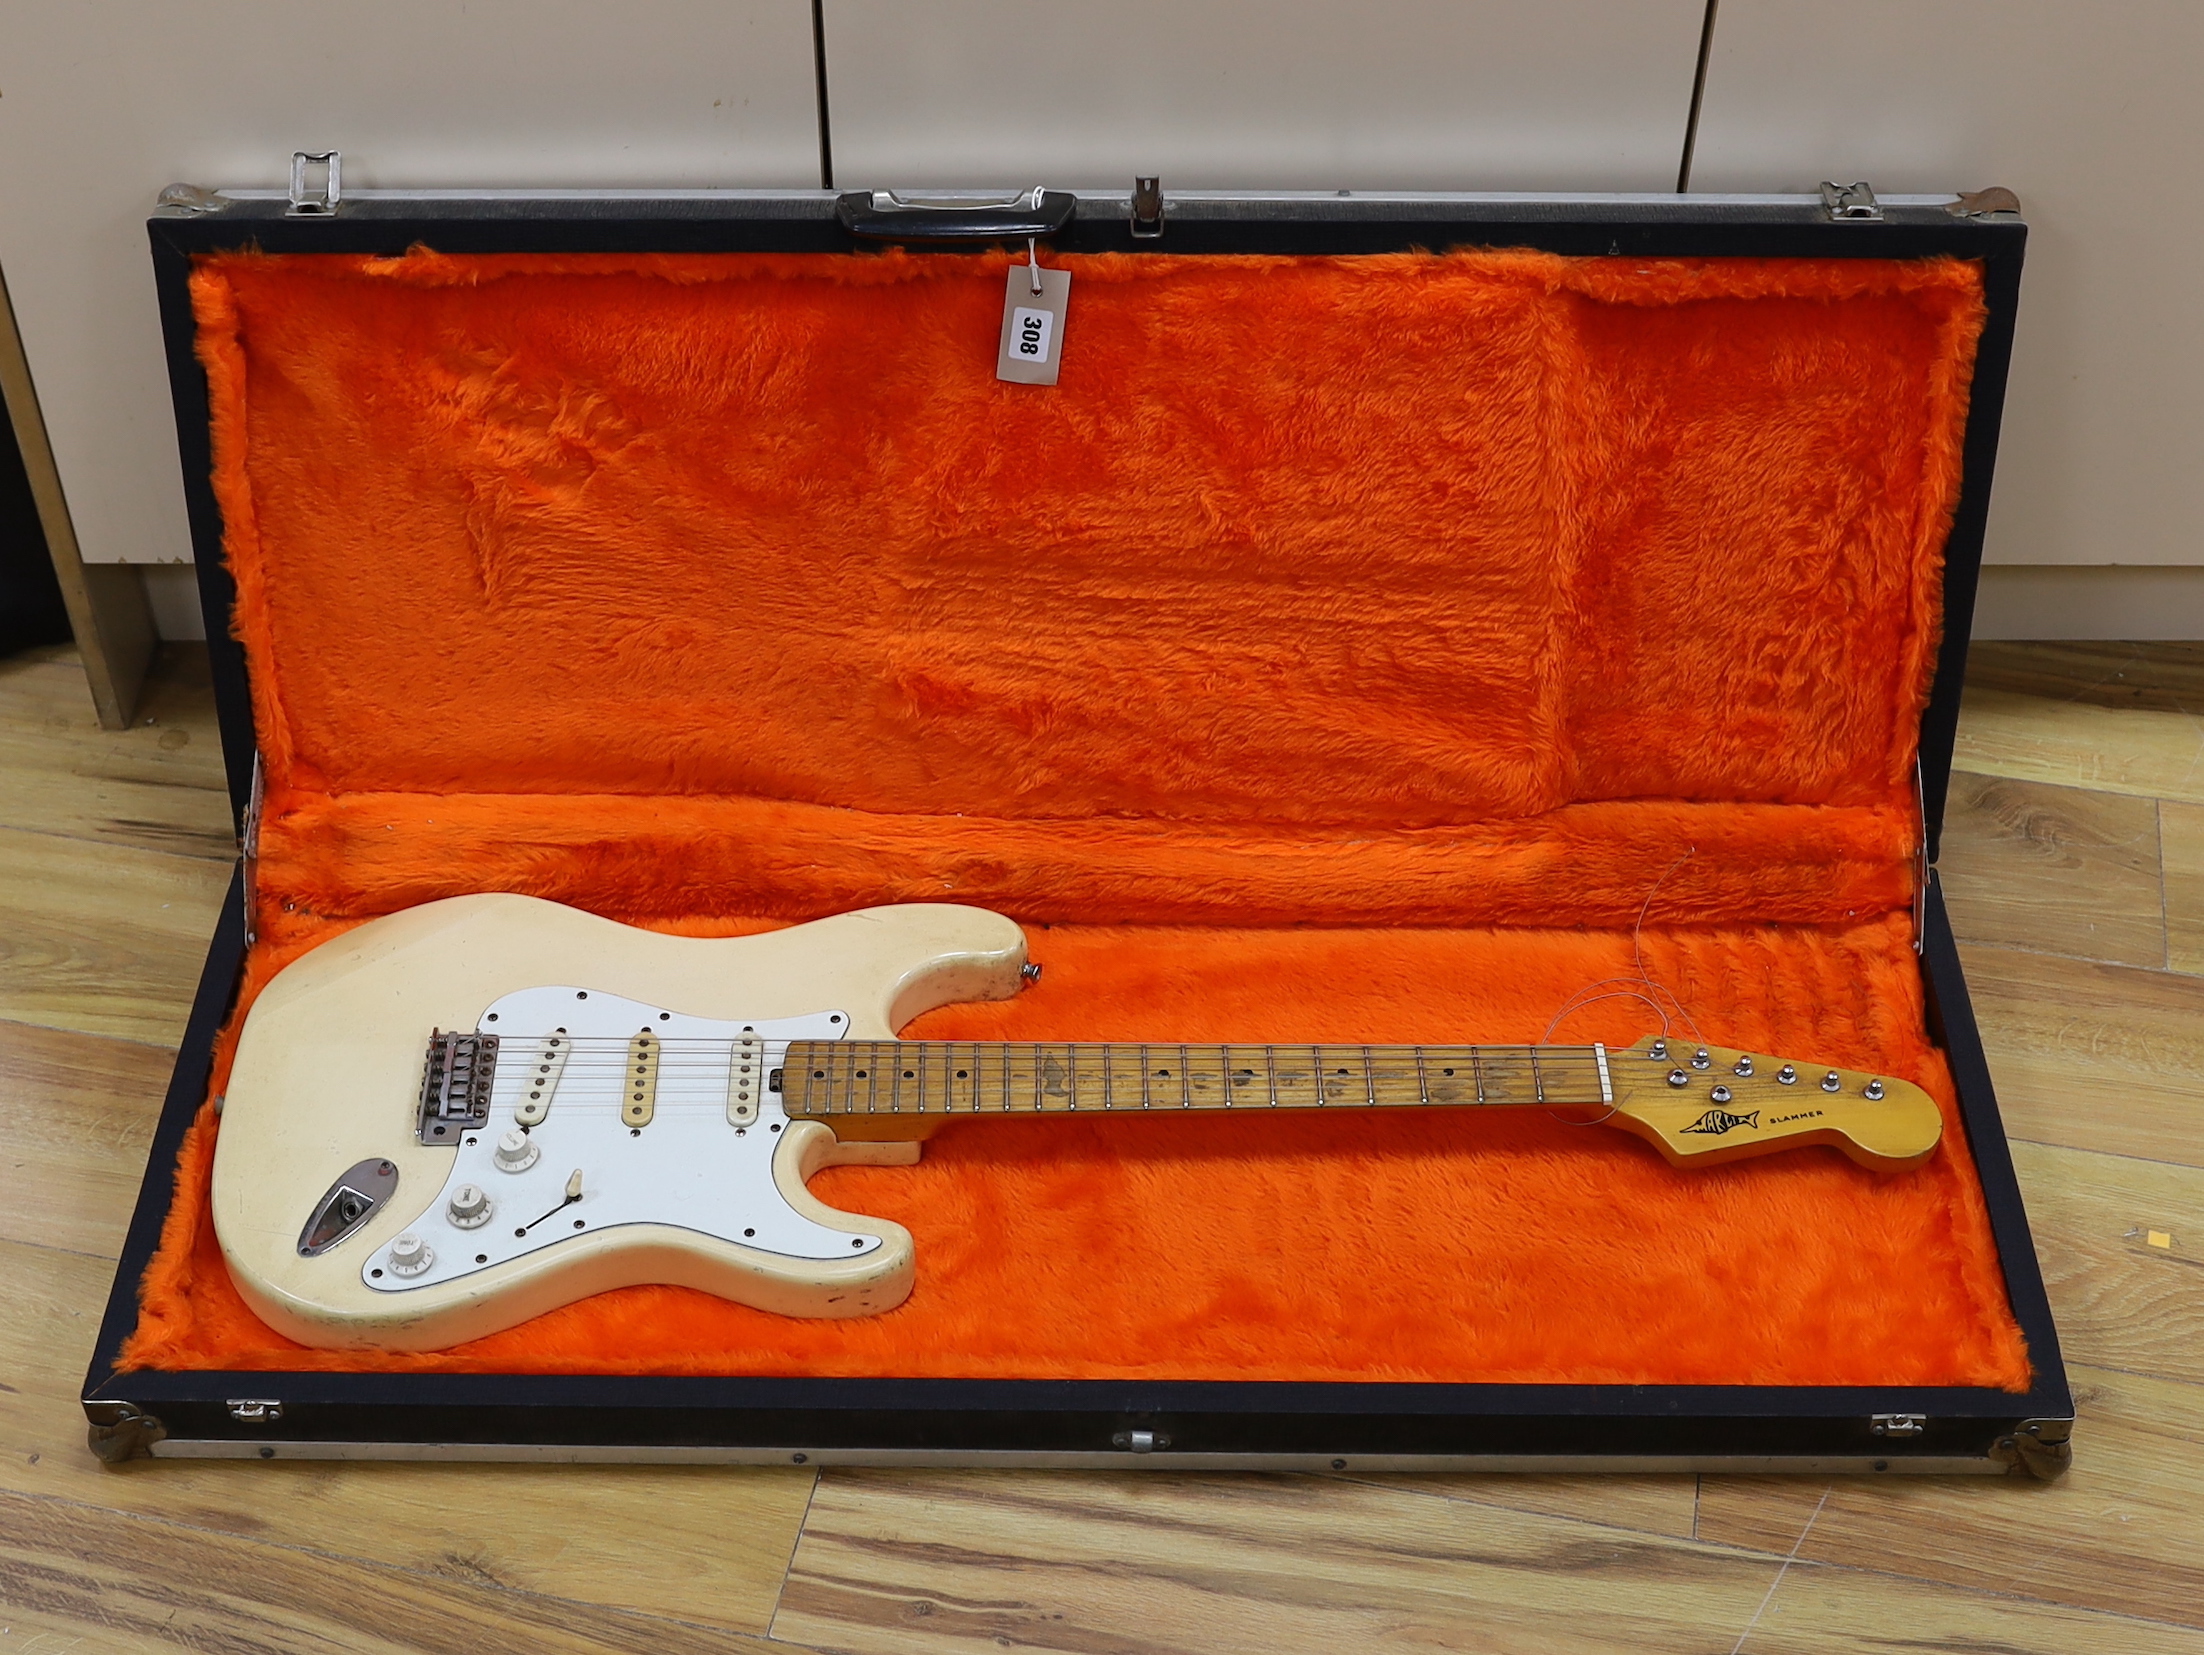 A Marlin Slammer electric guitar with maple neck, together with a flight case